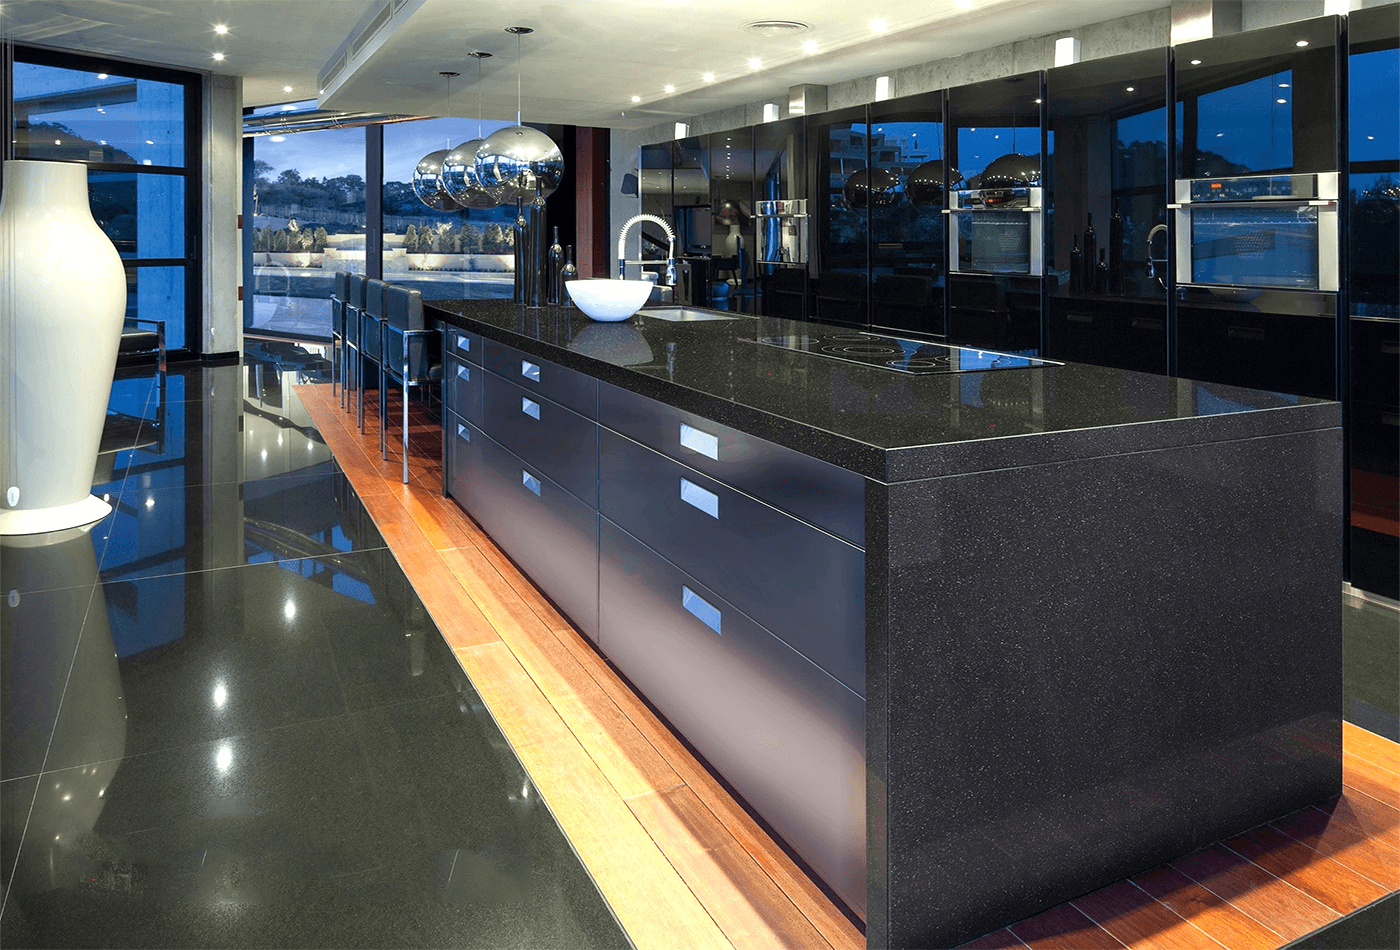 Luxe Looking Kitchen: Elevate Your Space With Opulent Design